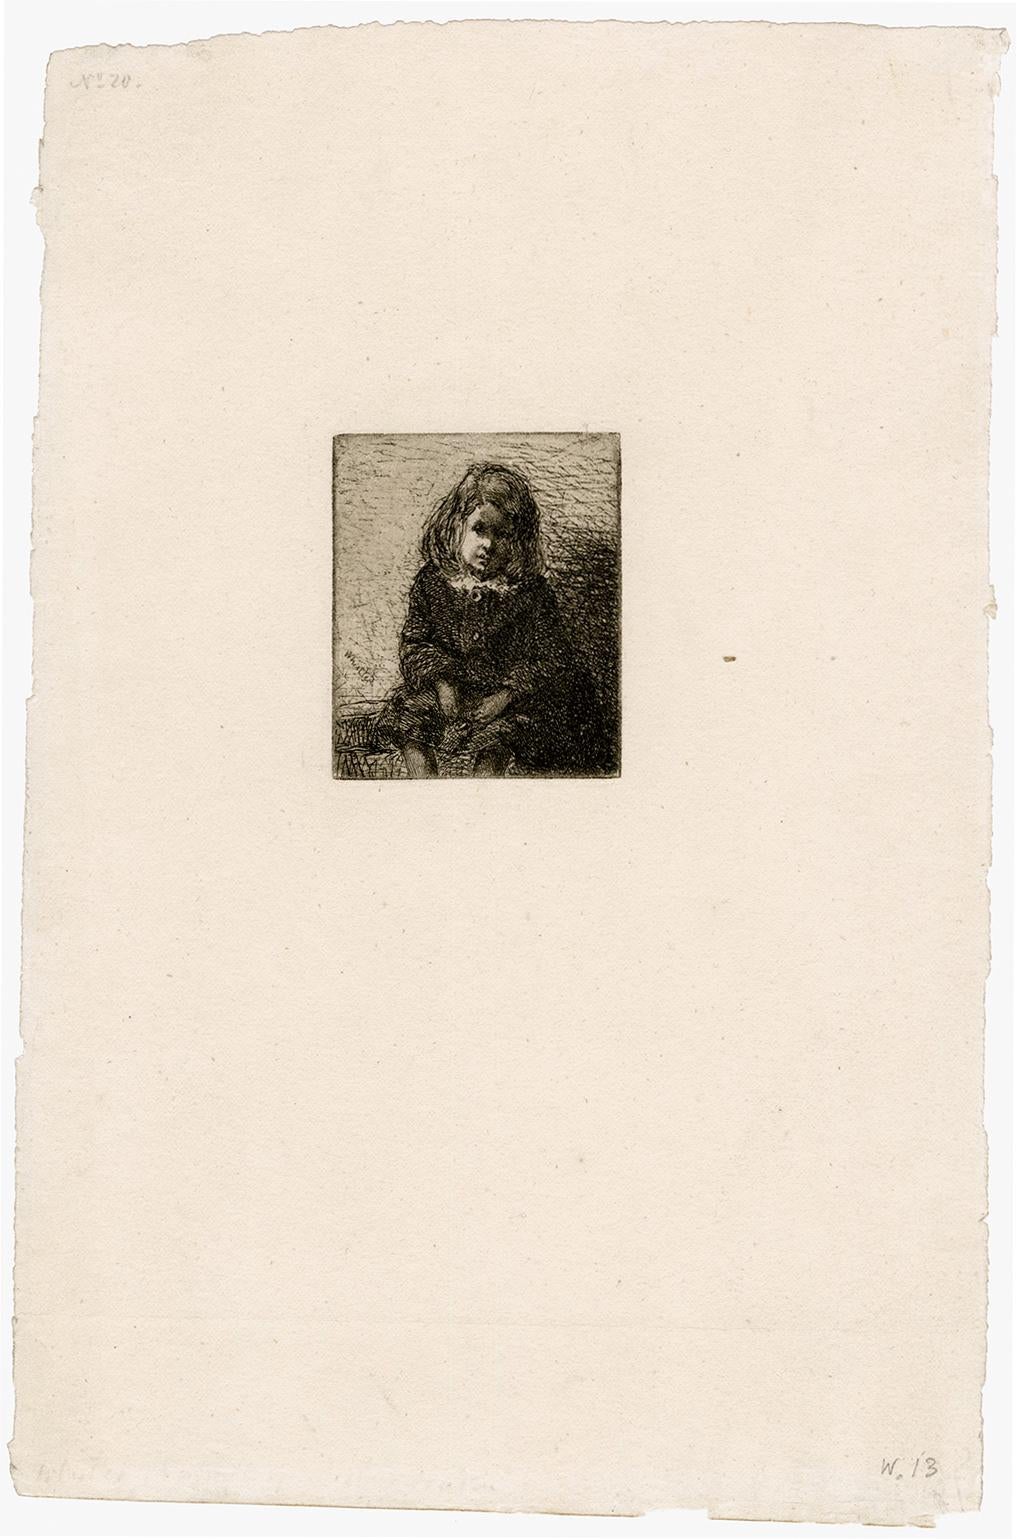 'Little Arthur' (from the 'French Set') — Mid-19th Century Impressionism - Print by James Abbott McNeill Whistler